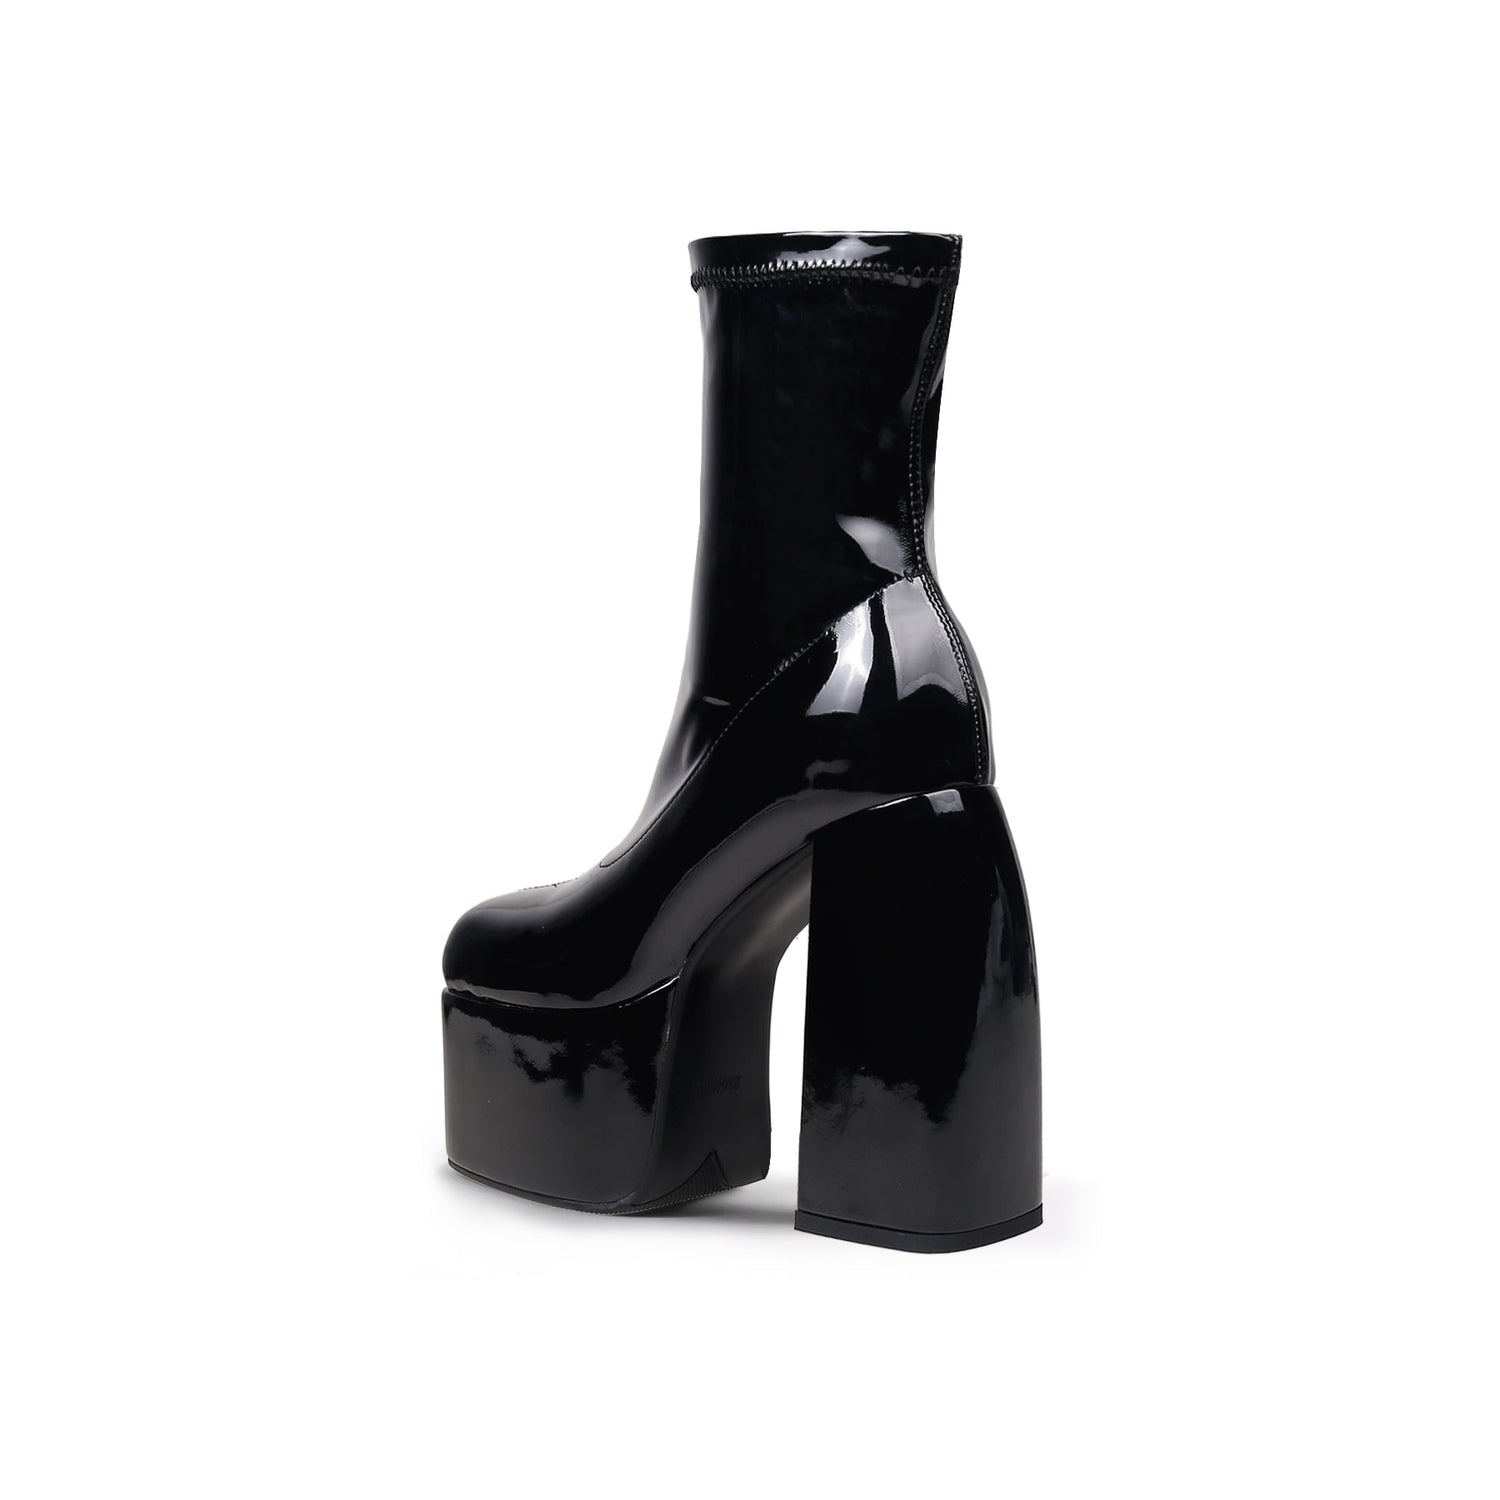 Chuncky Heeled Patent Black Ankle Boots - 0cm